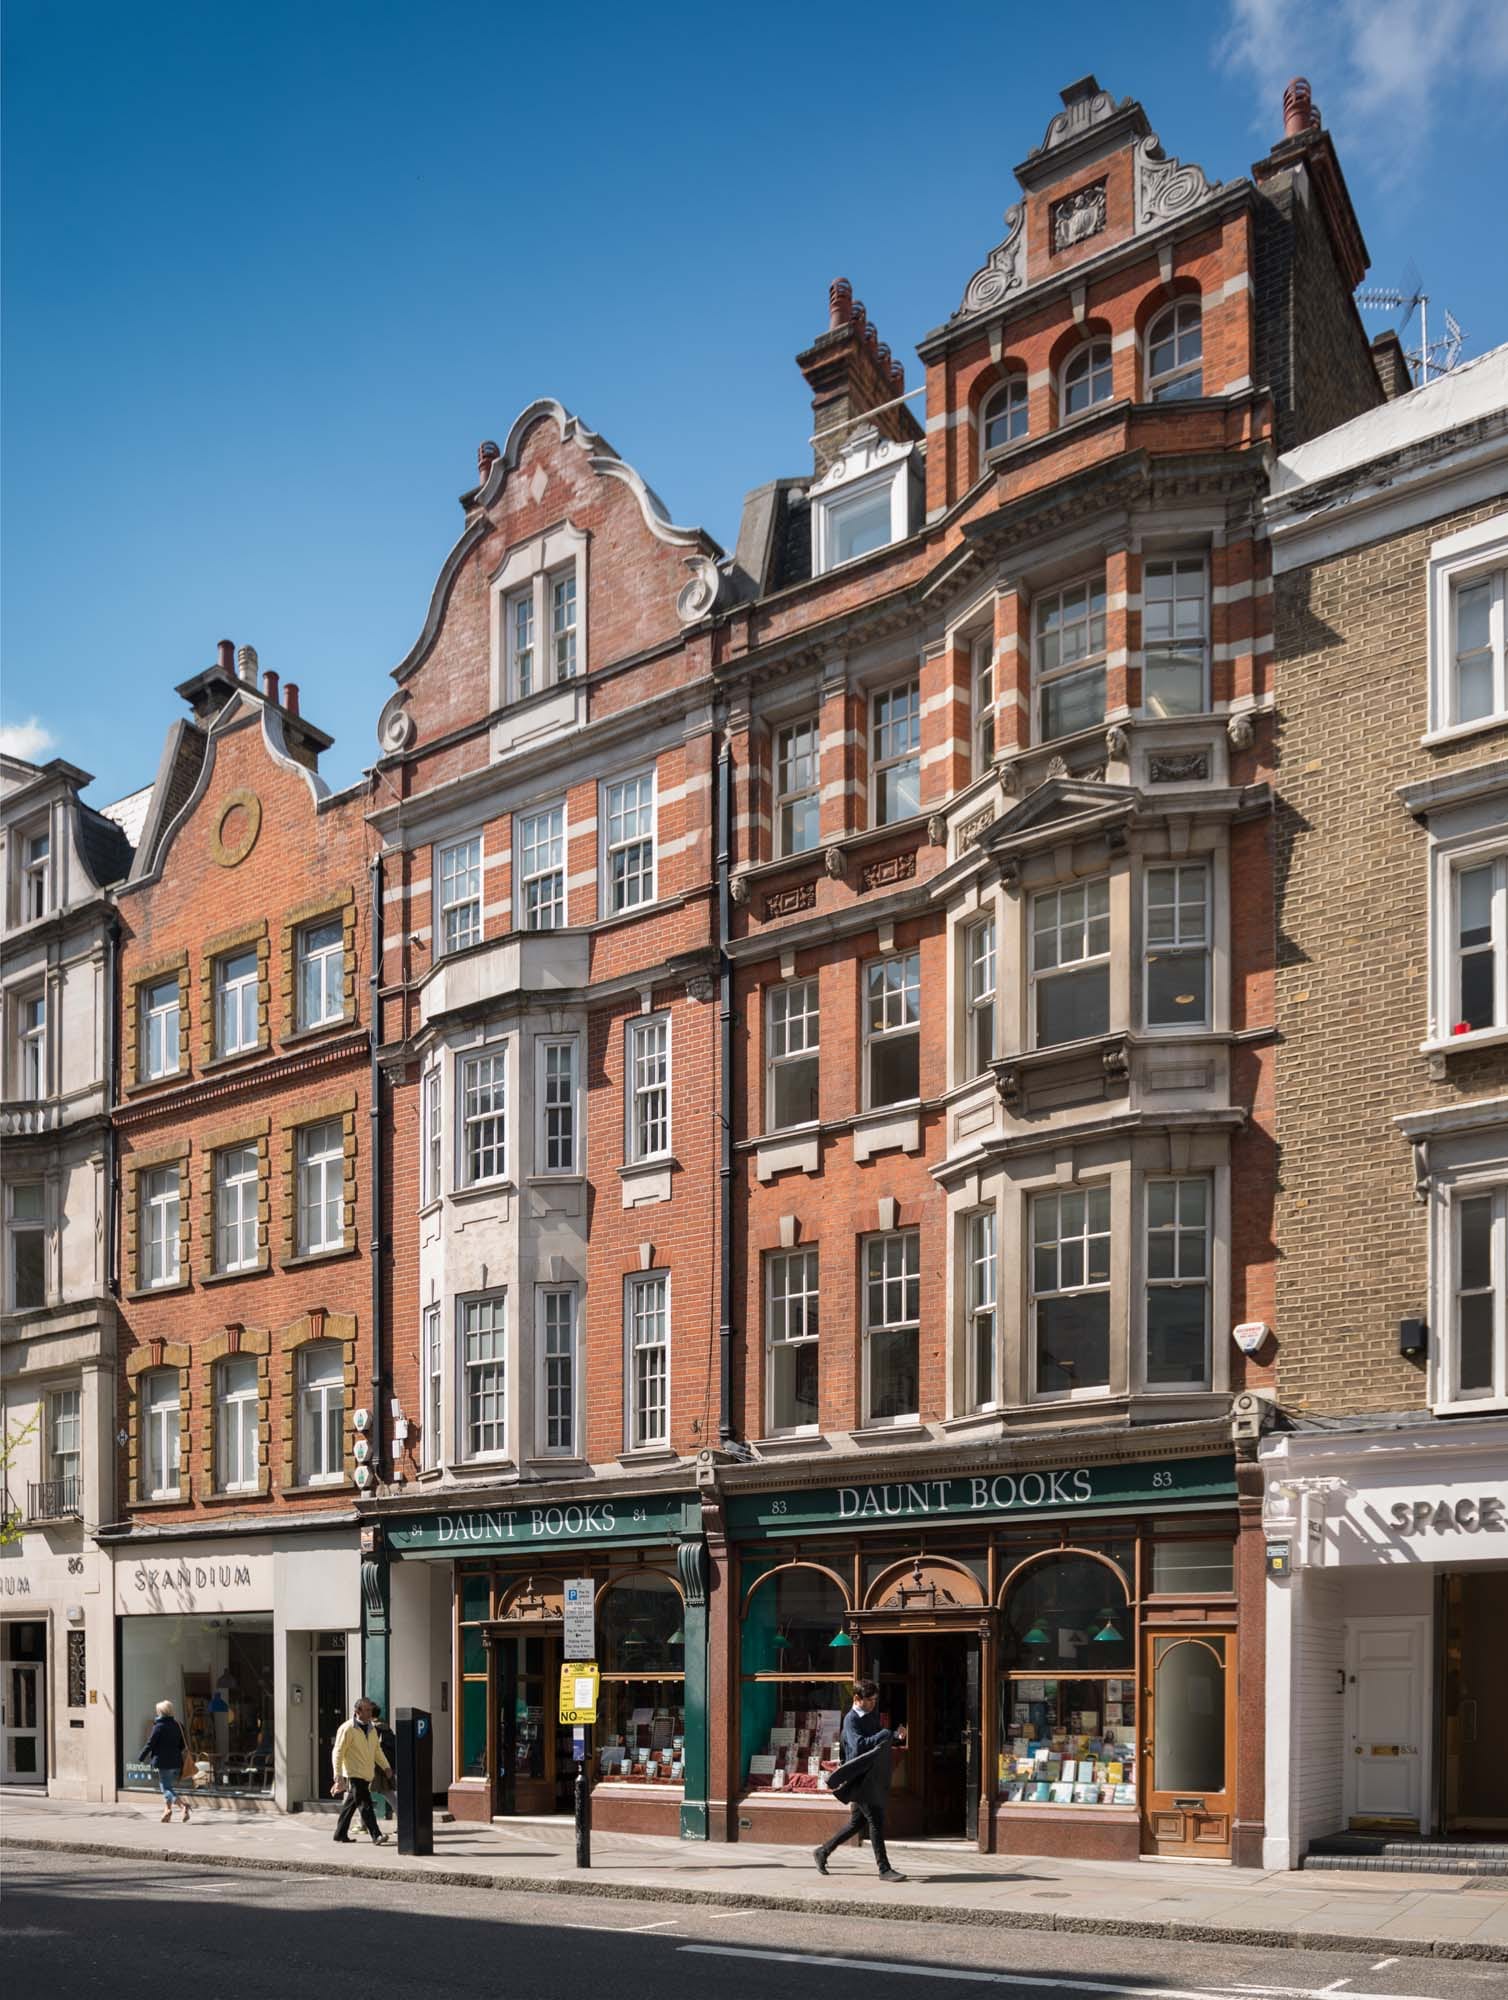 Daunt's Bookshop, Marylebone High Street. Photographed by Chris Redgrave for the Howard de Walden Estate and the Survey of London Historic England